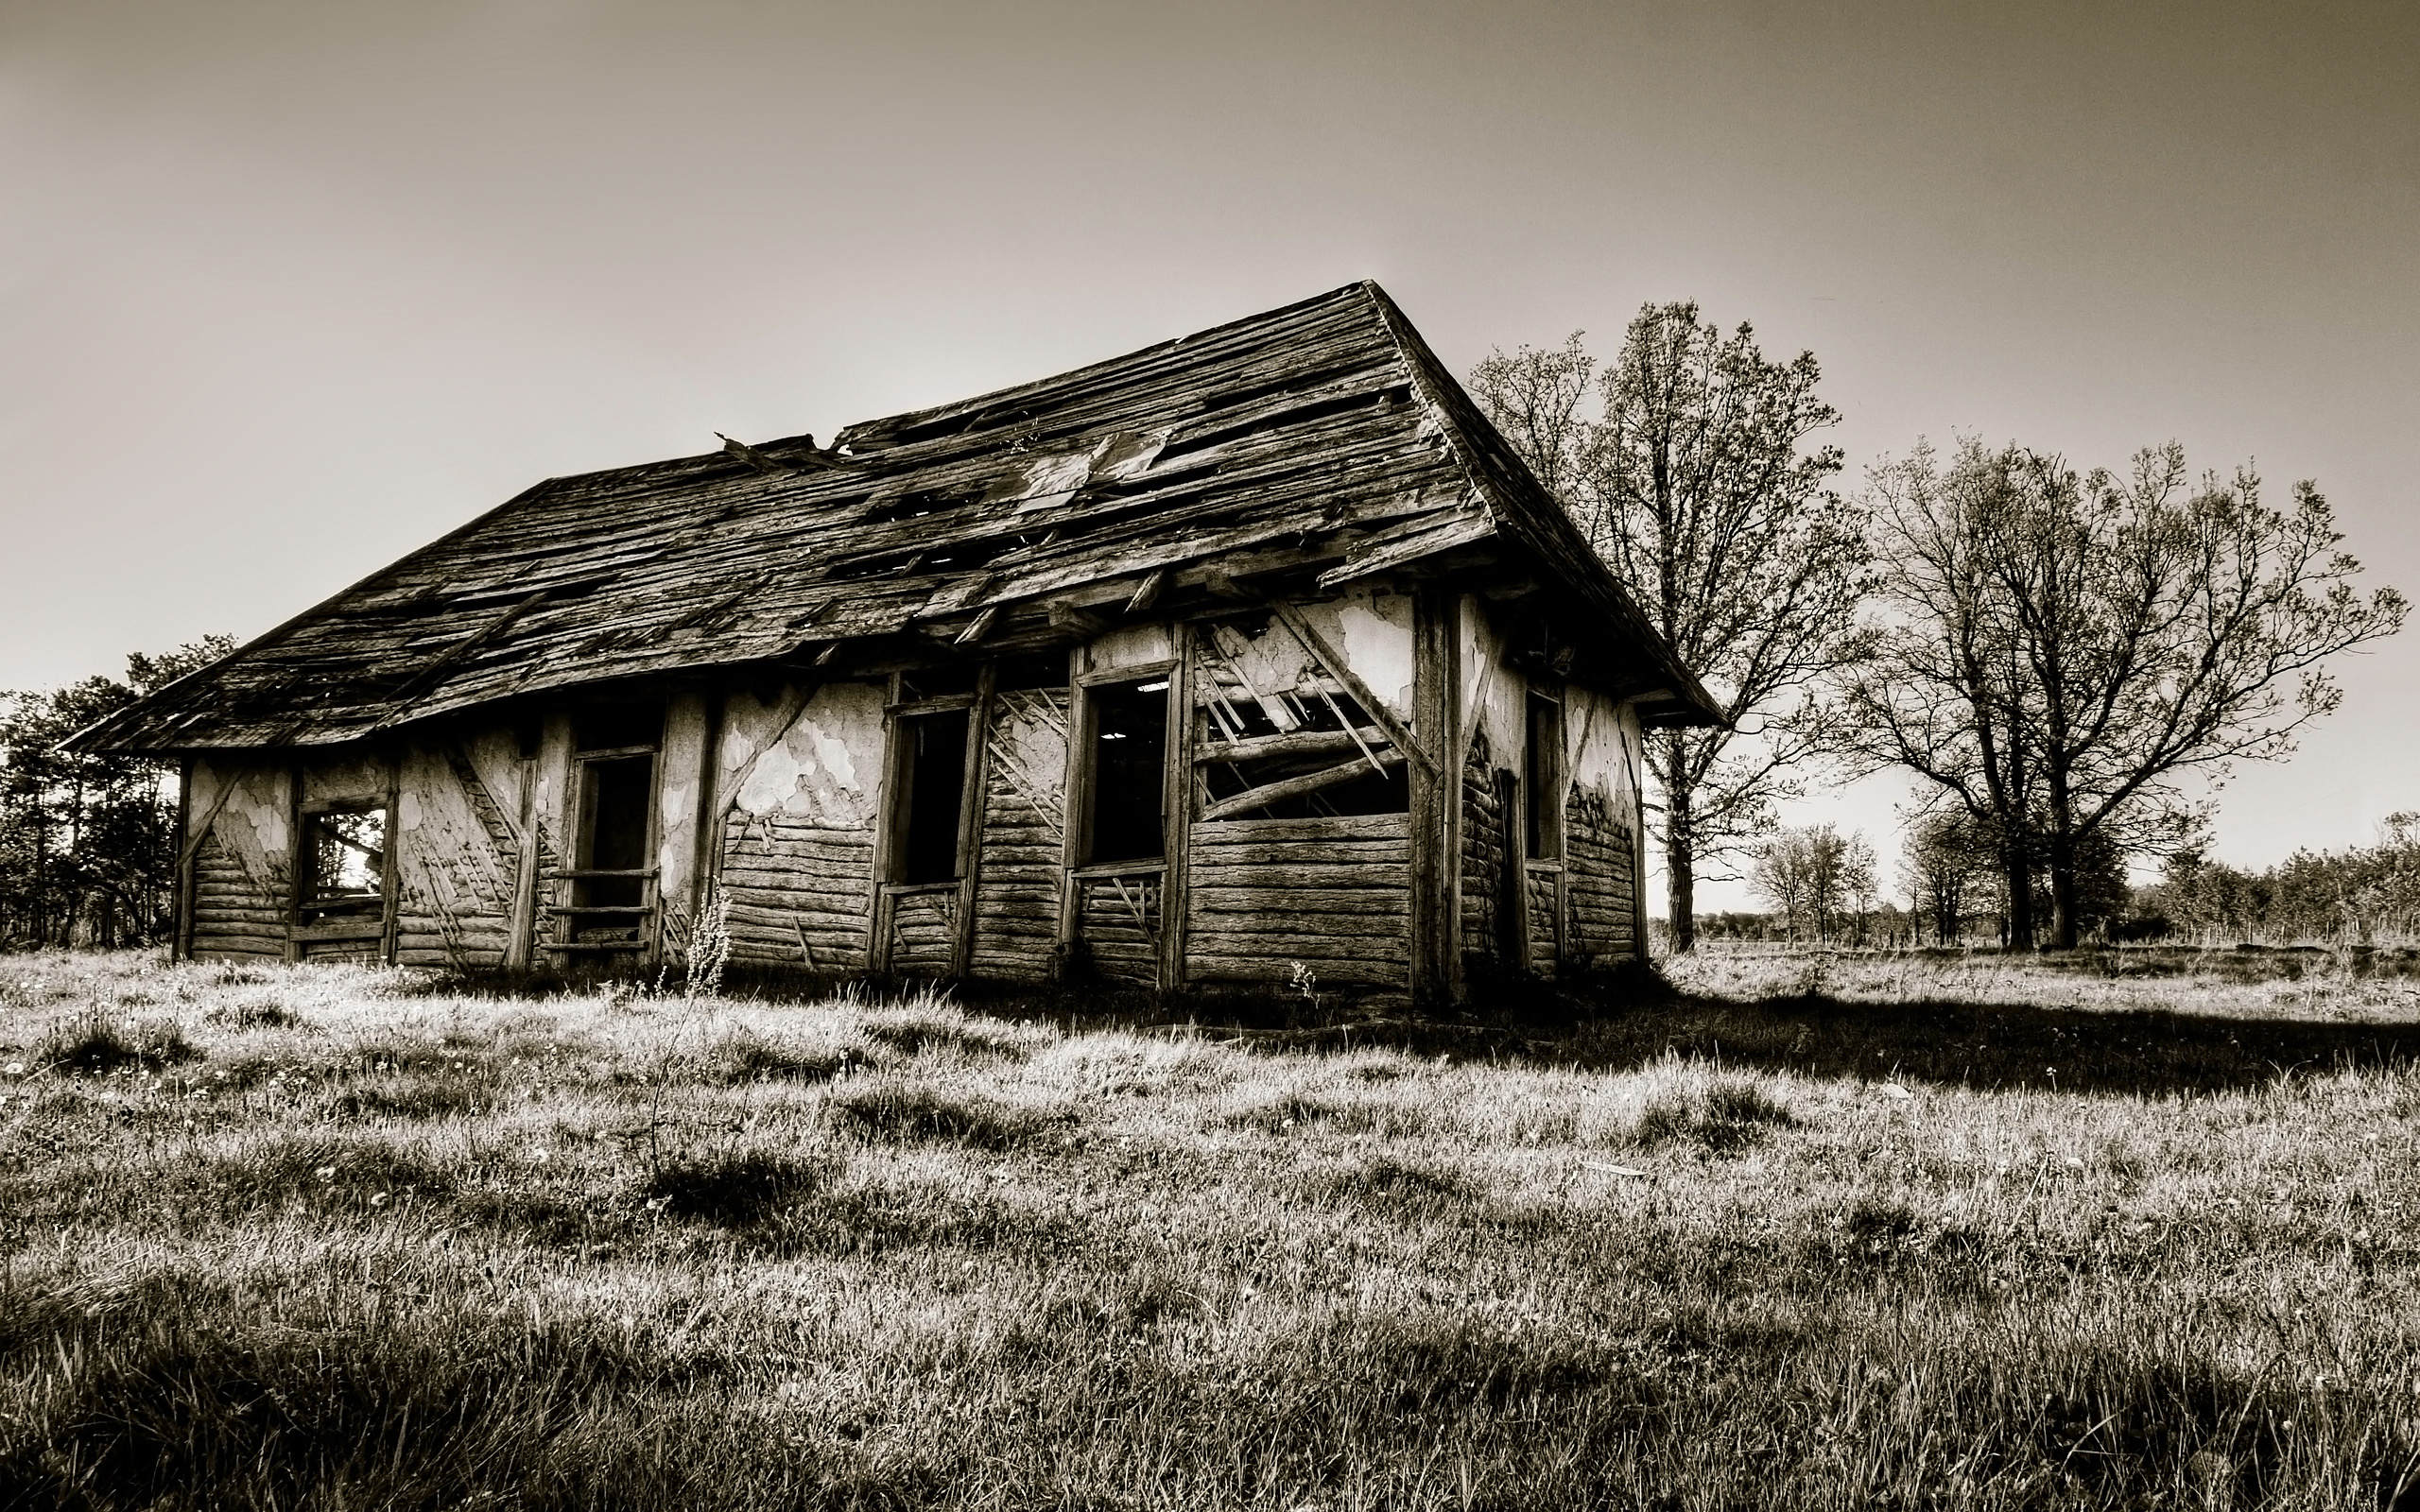  HQ This Old House Wallpaper   HQ Wallpapers 2560x1600